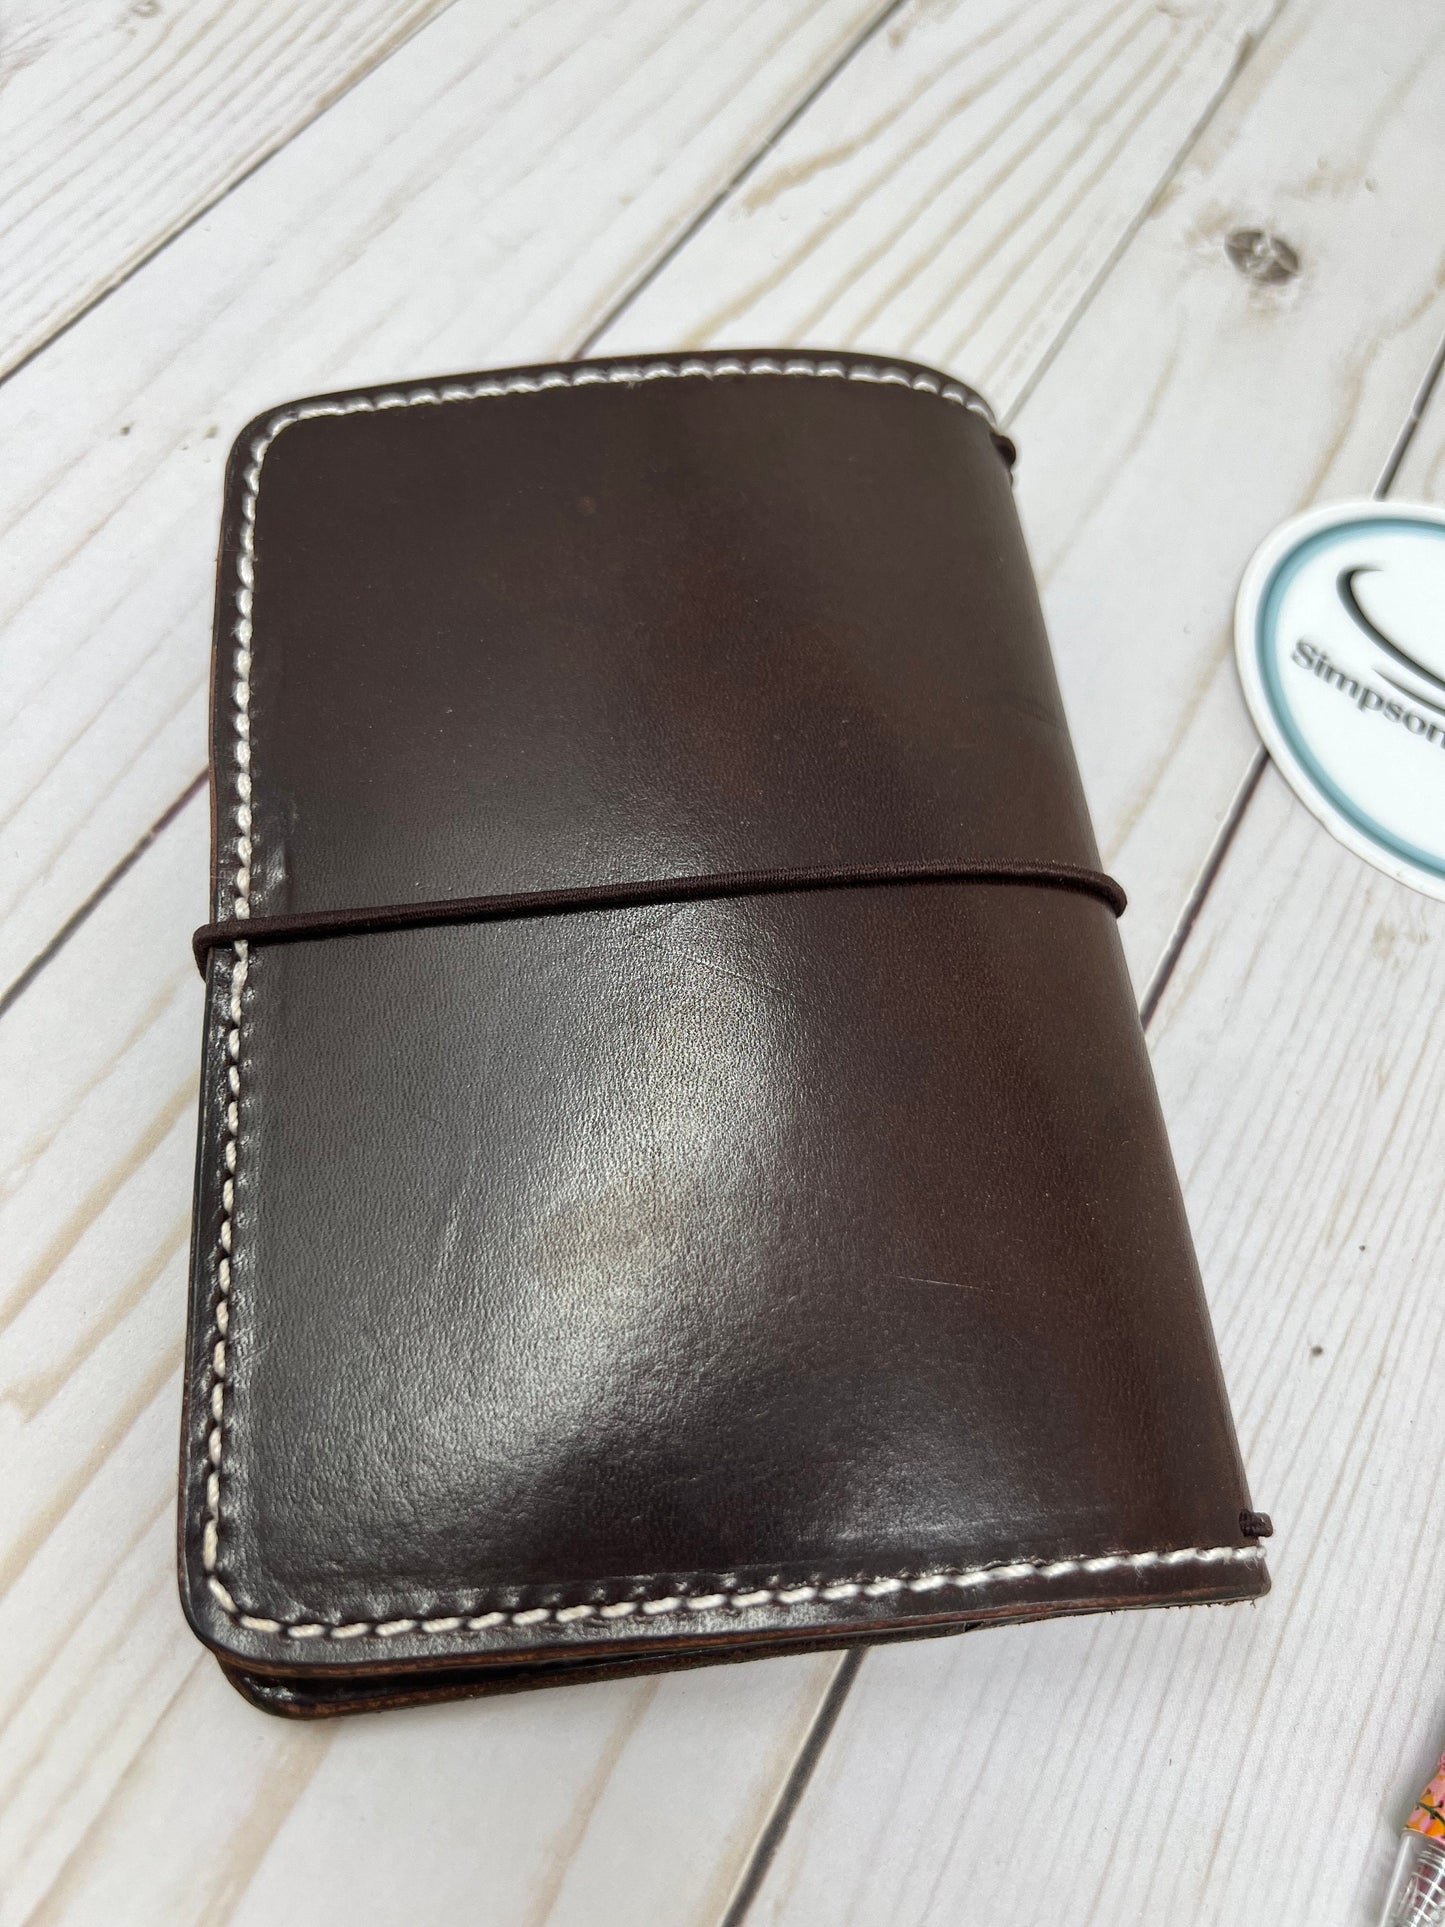 Ready to Ship Pocket Walnut Harness Deluxe Traveler's Notebook, Sized for 3.5”x5.5” inserts (sold separately)